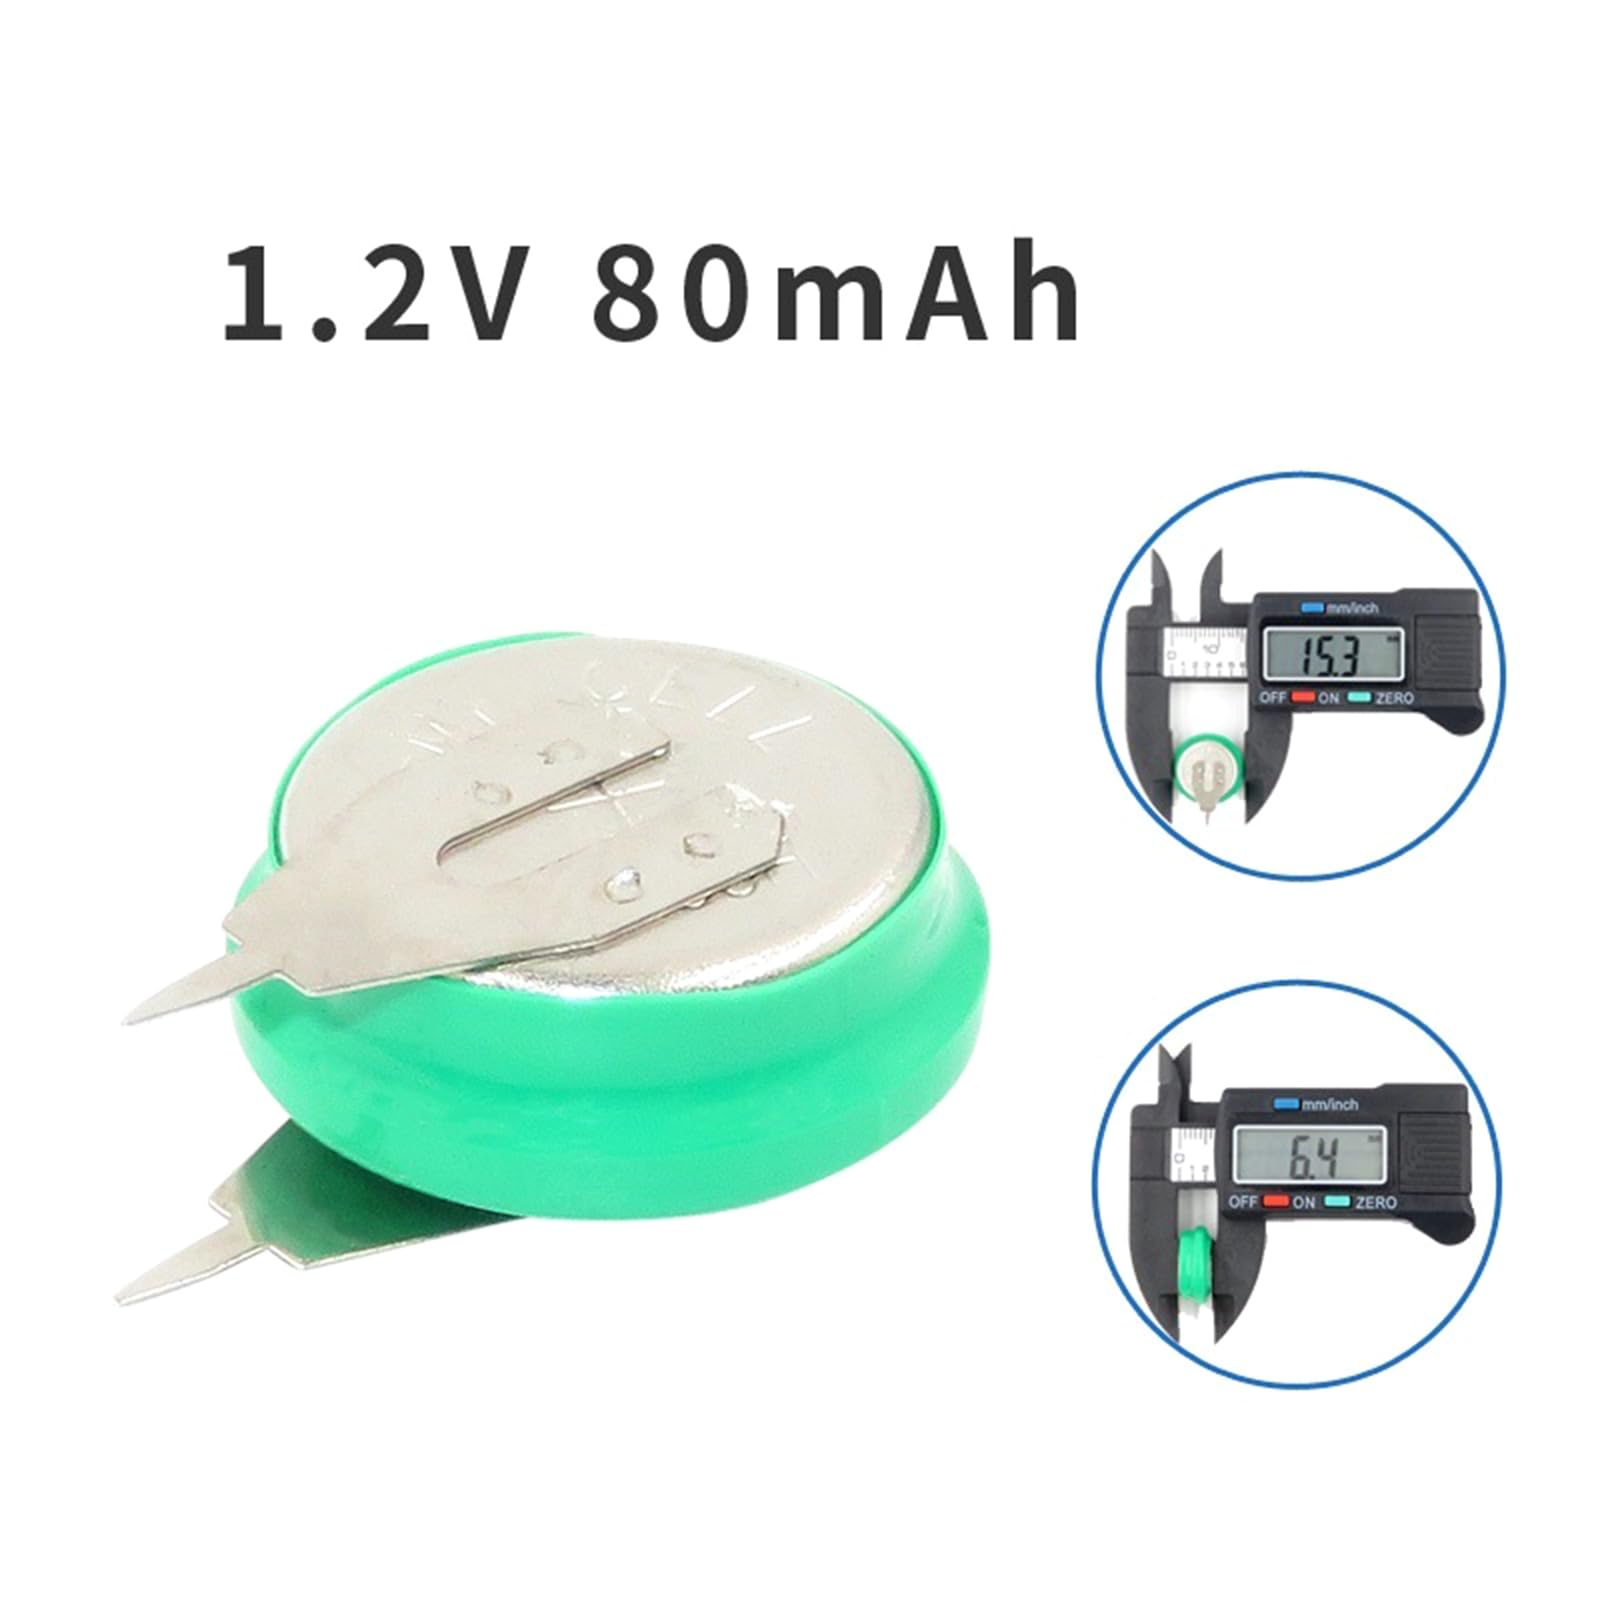 Jesscasday High Capacity NiMh Rechargeable Batteries Long Lasting 1.2V 80mAh Coin Cell Batteries with Solder Pins for Electric Toy